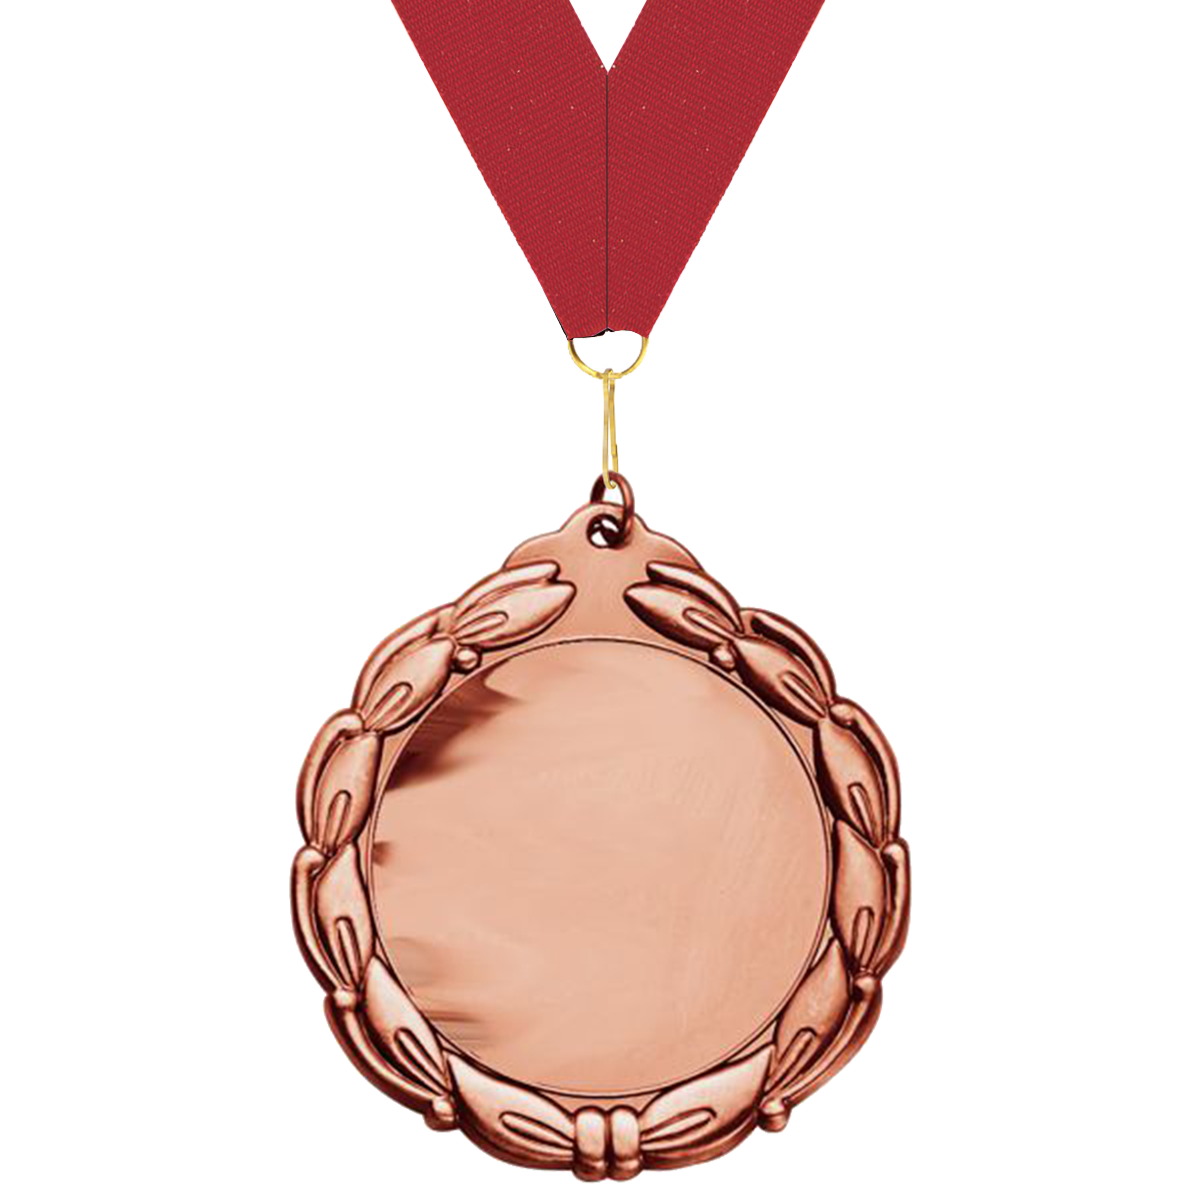 Classic Medallion in Antique Gold, Silver and Bronze